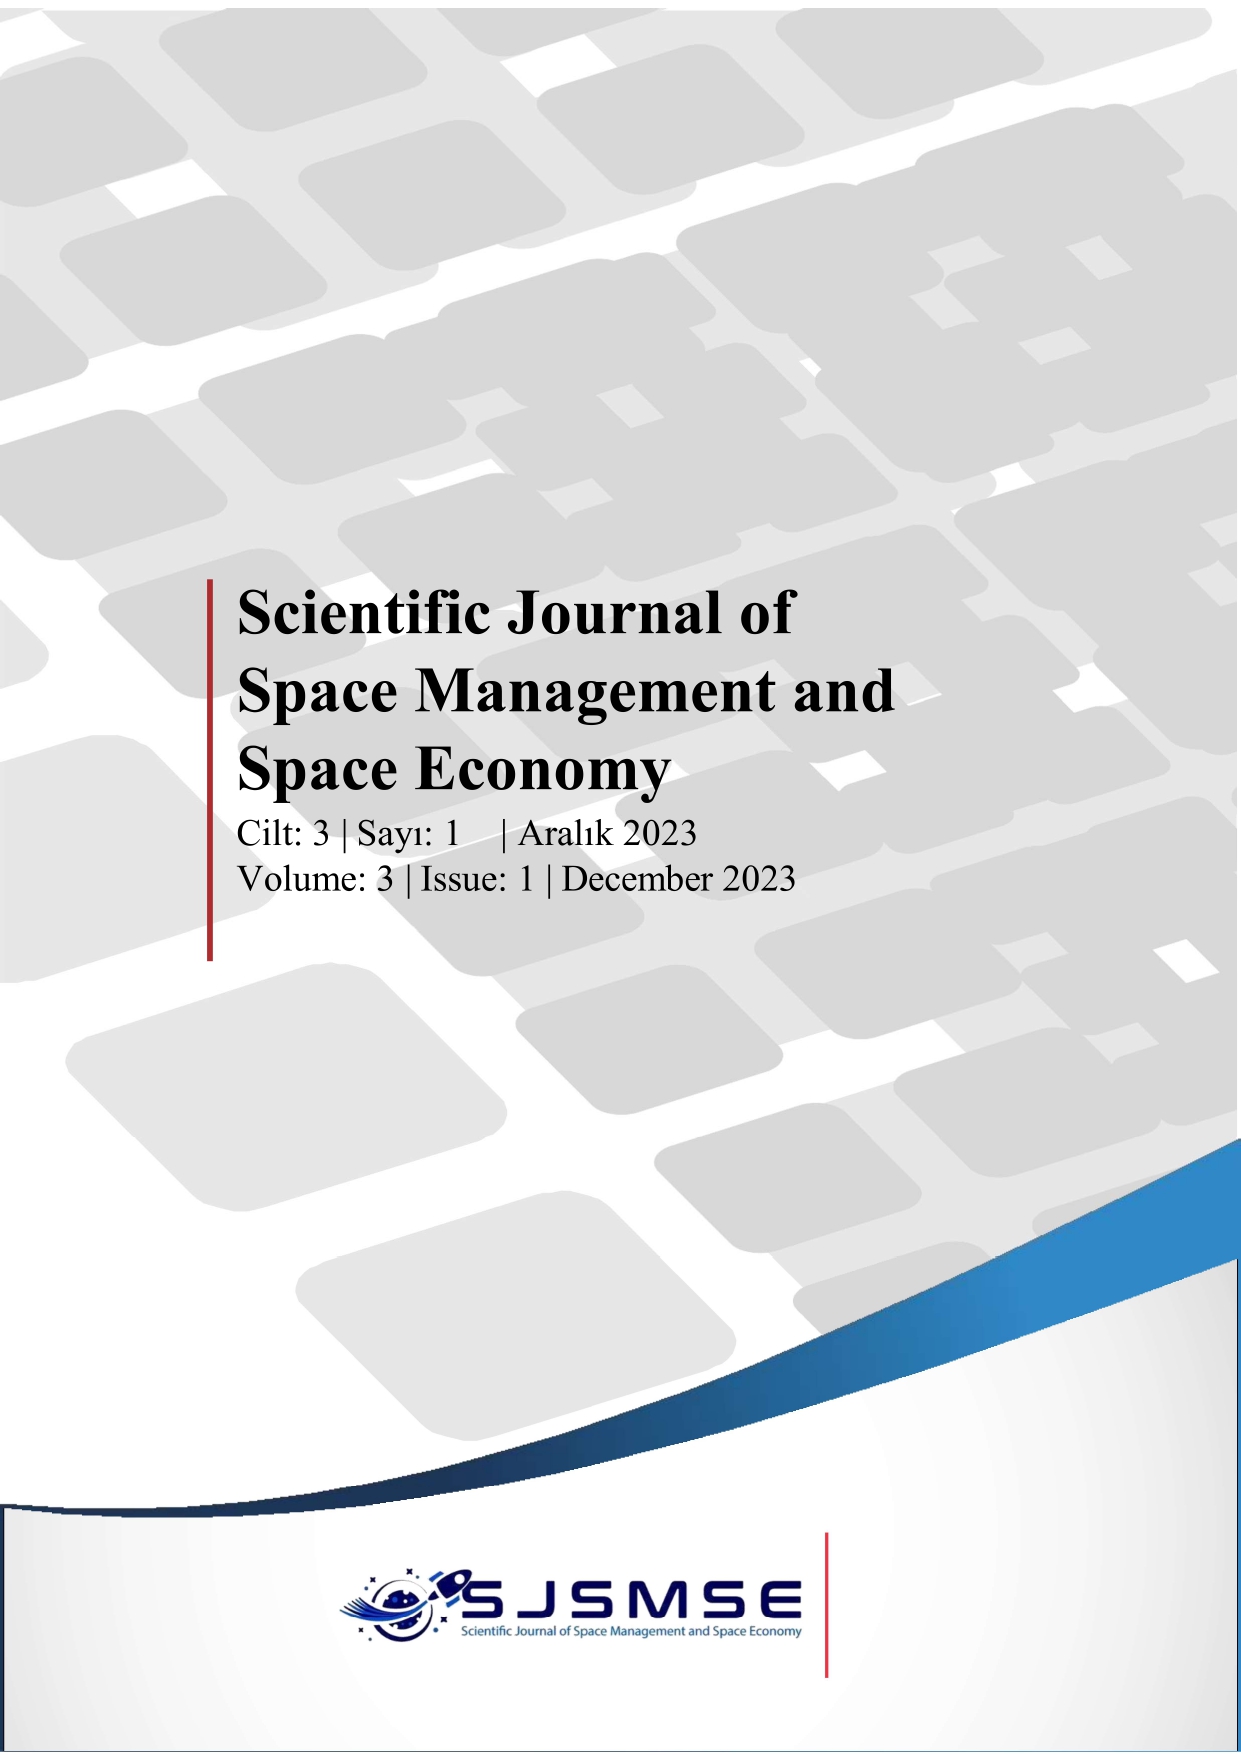 					Cilt 3 Sayı 1 (2023): SCIENTIFIC JOURNAL OF SPACE MANAGEMENT AND SPACE ECONOMY Gör
				